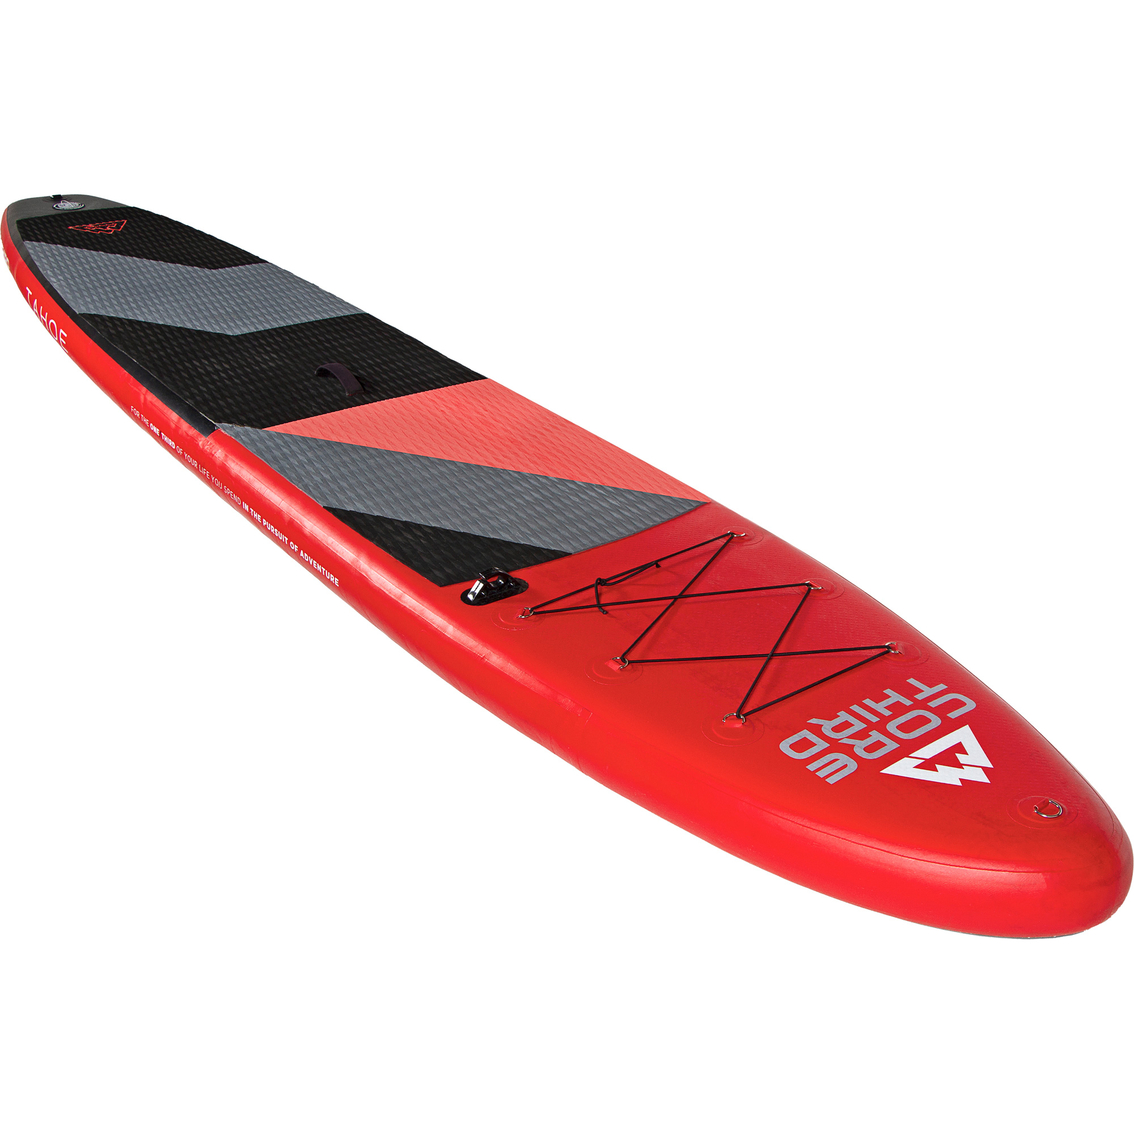 Core Third Tahoe Inflatable Paddle Board - Image 7 of 8